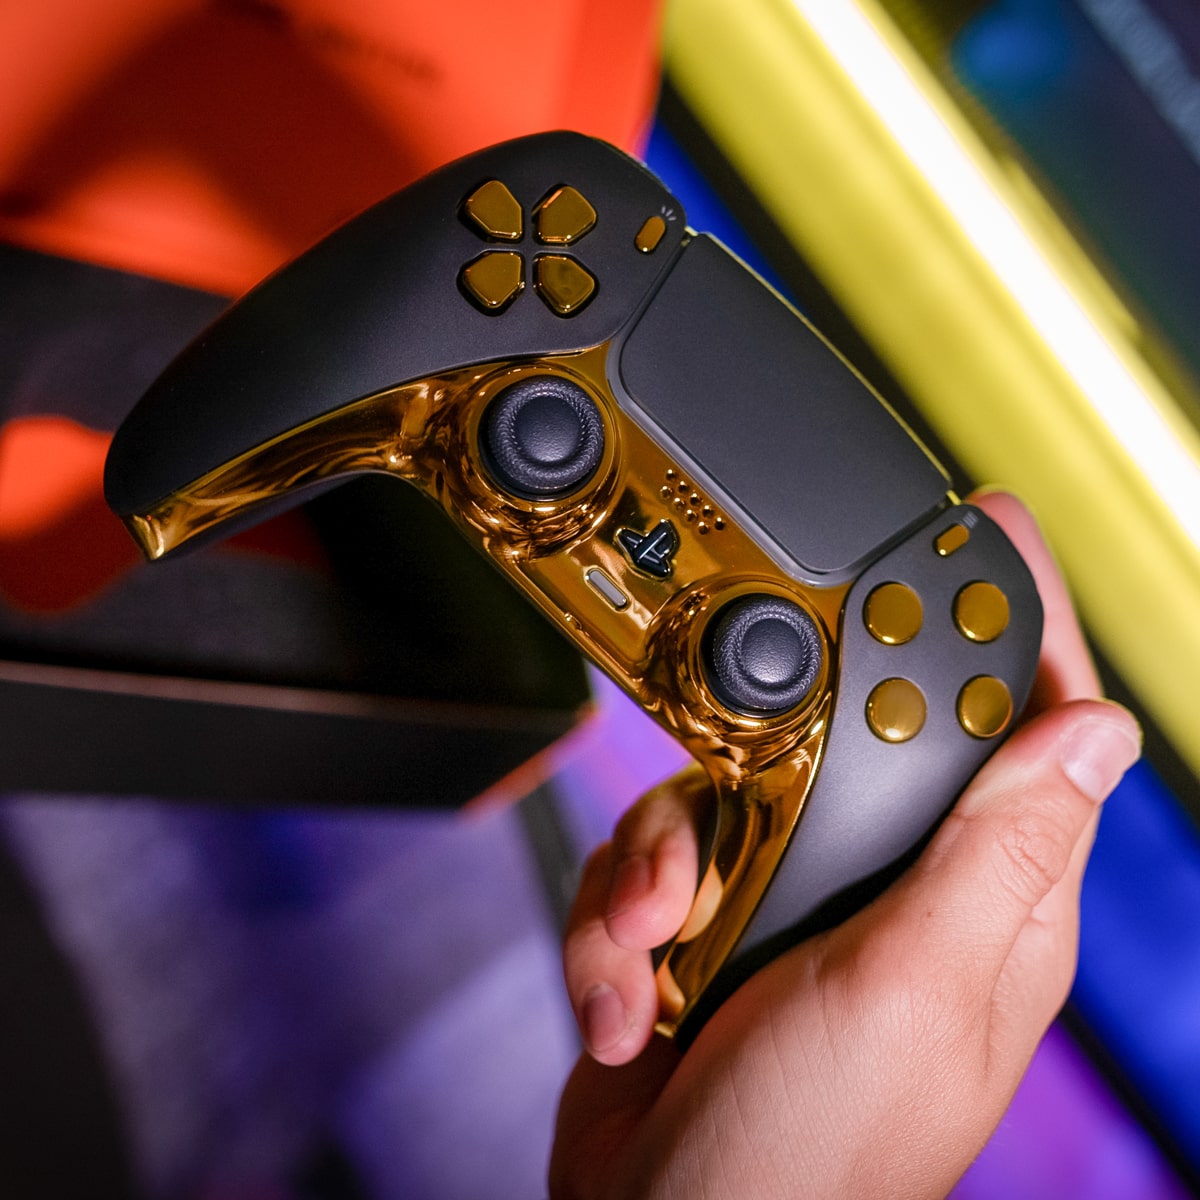 This All Gold PS5 Controller is CRAZY 😳 Gamenetics Controller